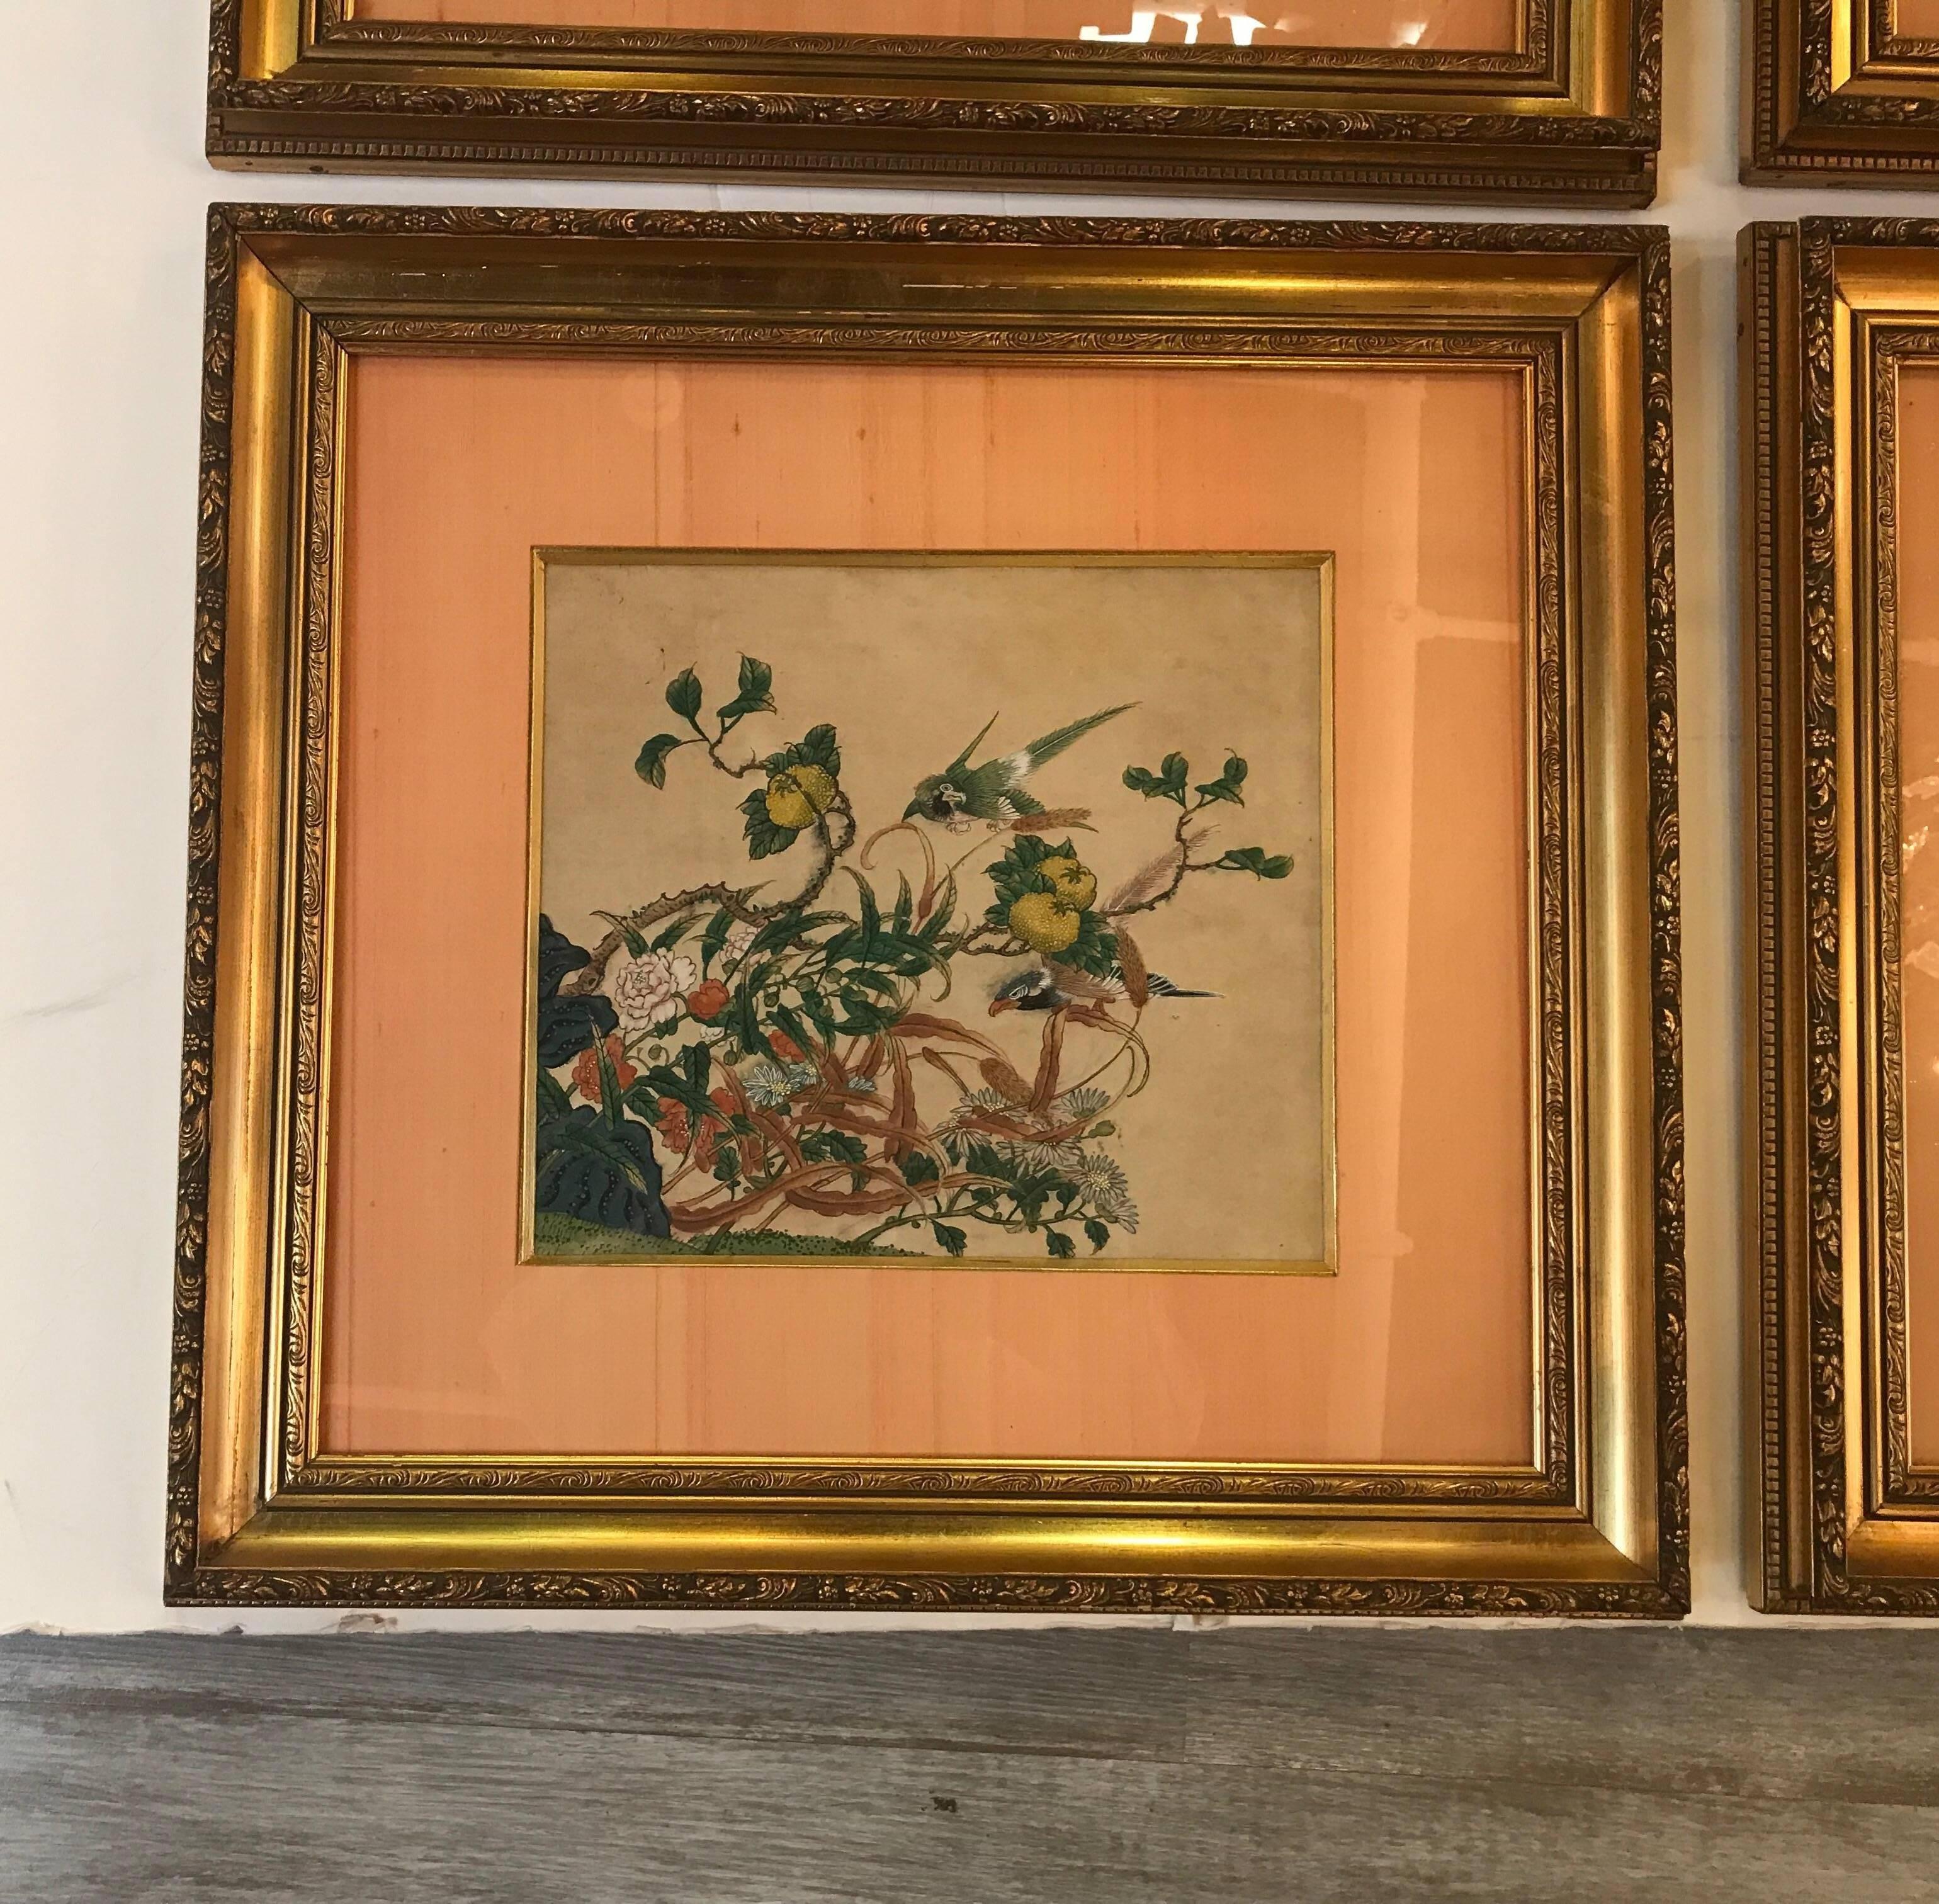 Original late 18th-early 19th century Chinese watercolors in more recent frames with silk mats under glass. The watercolors are ornithological themed with birds and floral branches. The pictures have a slight glare from the glass.